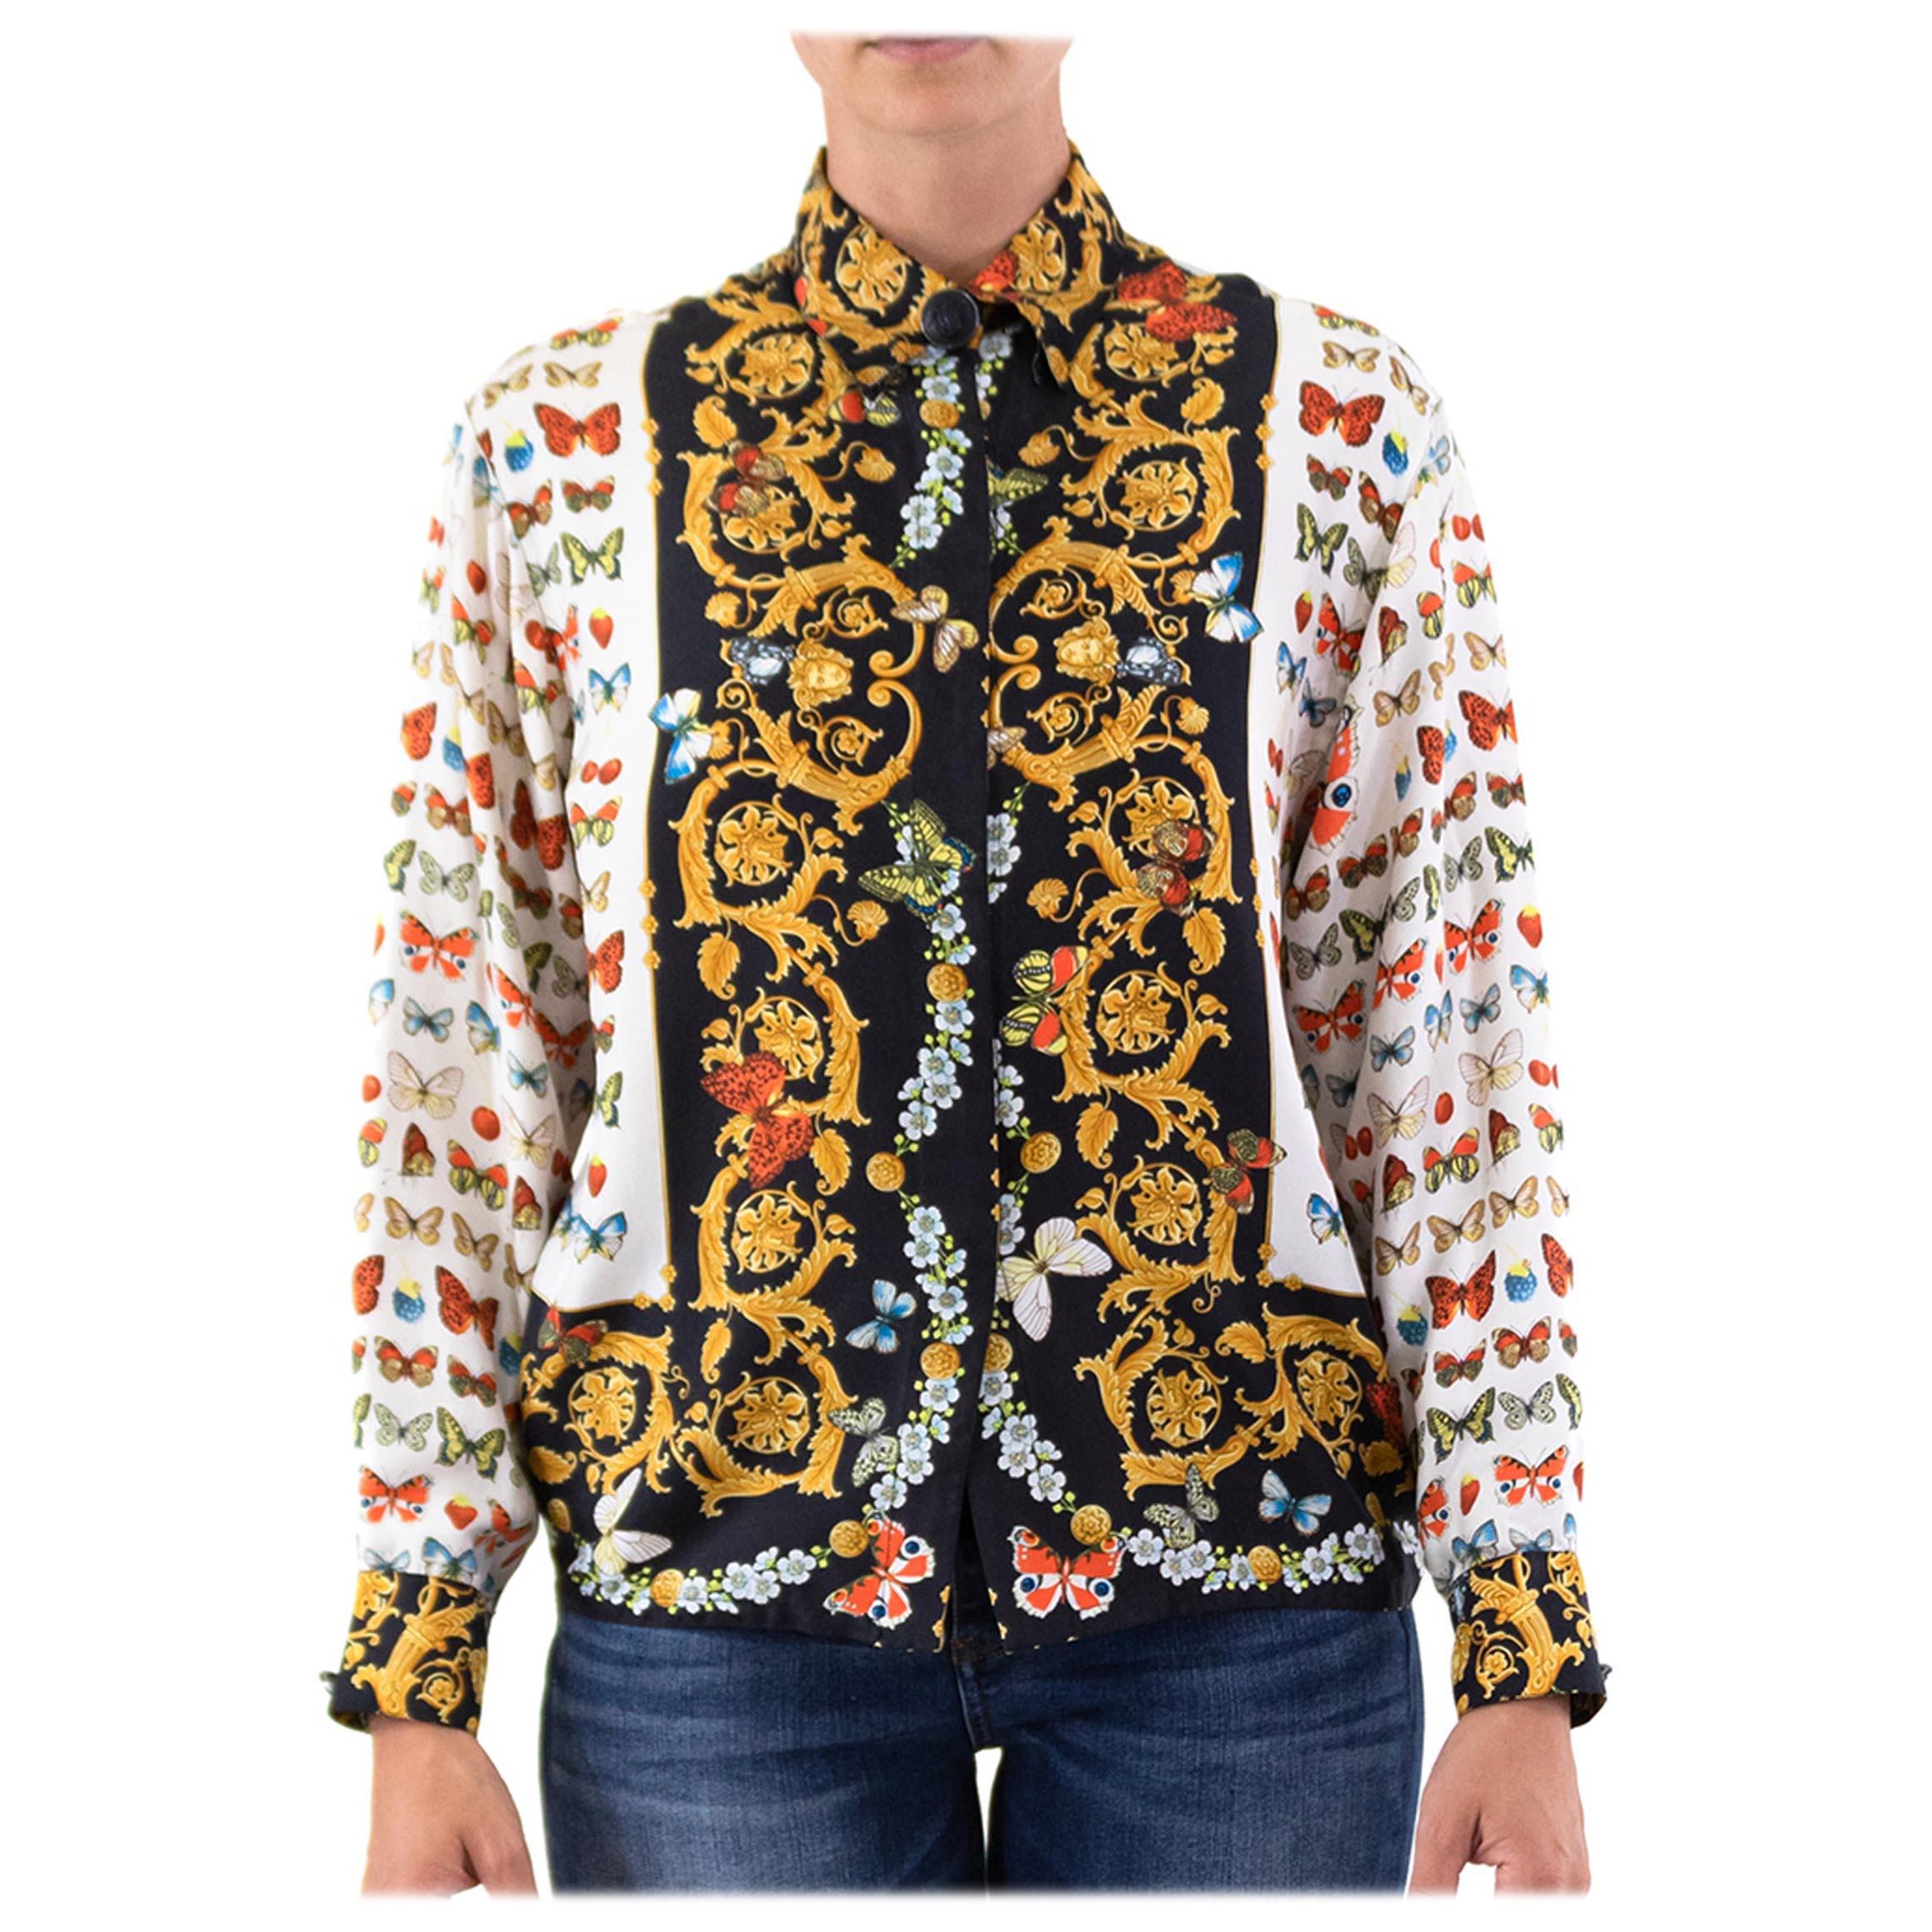 1990S VERSACE Baroque Butterfly Print Blouse